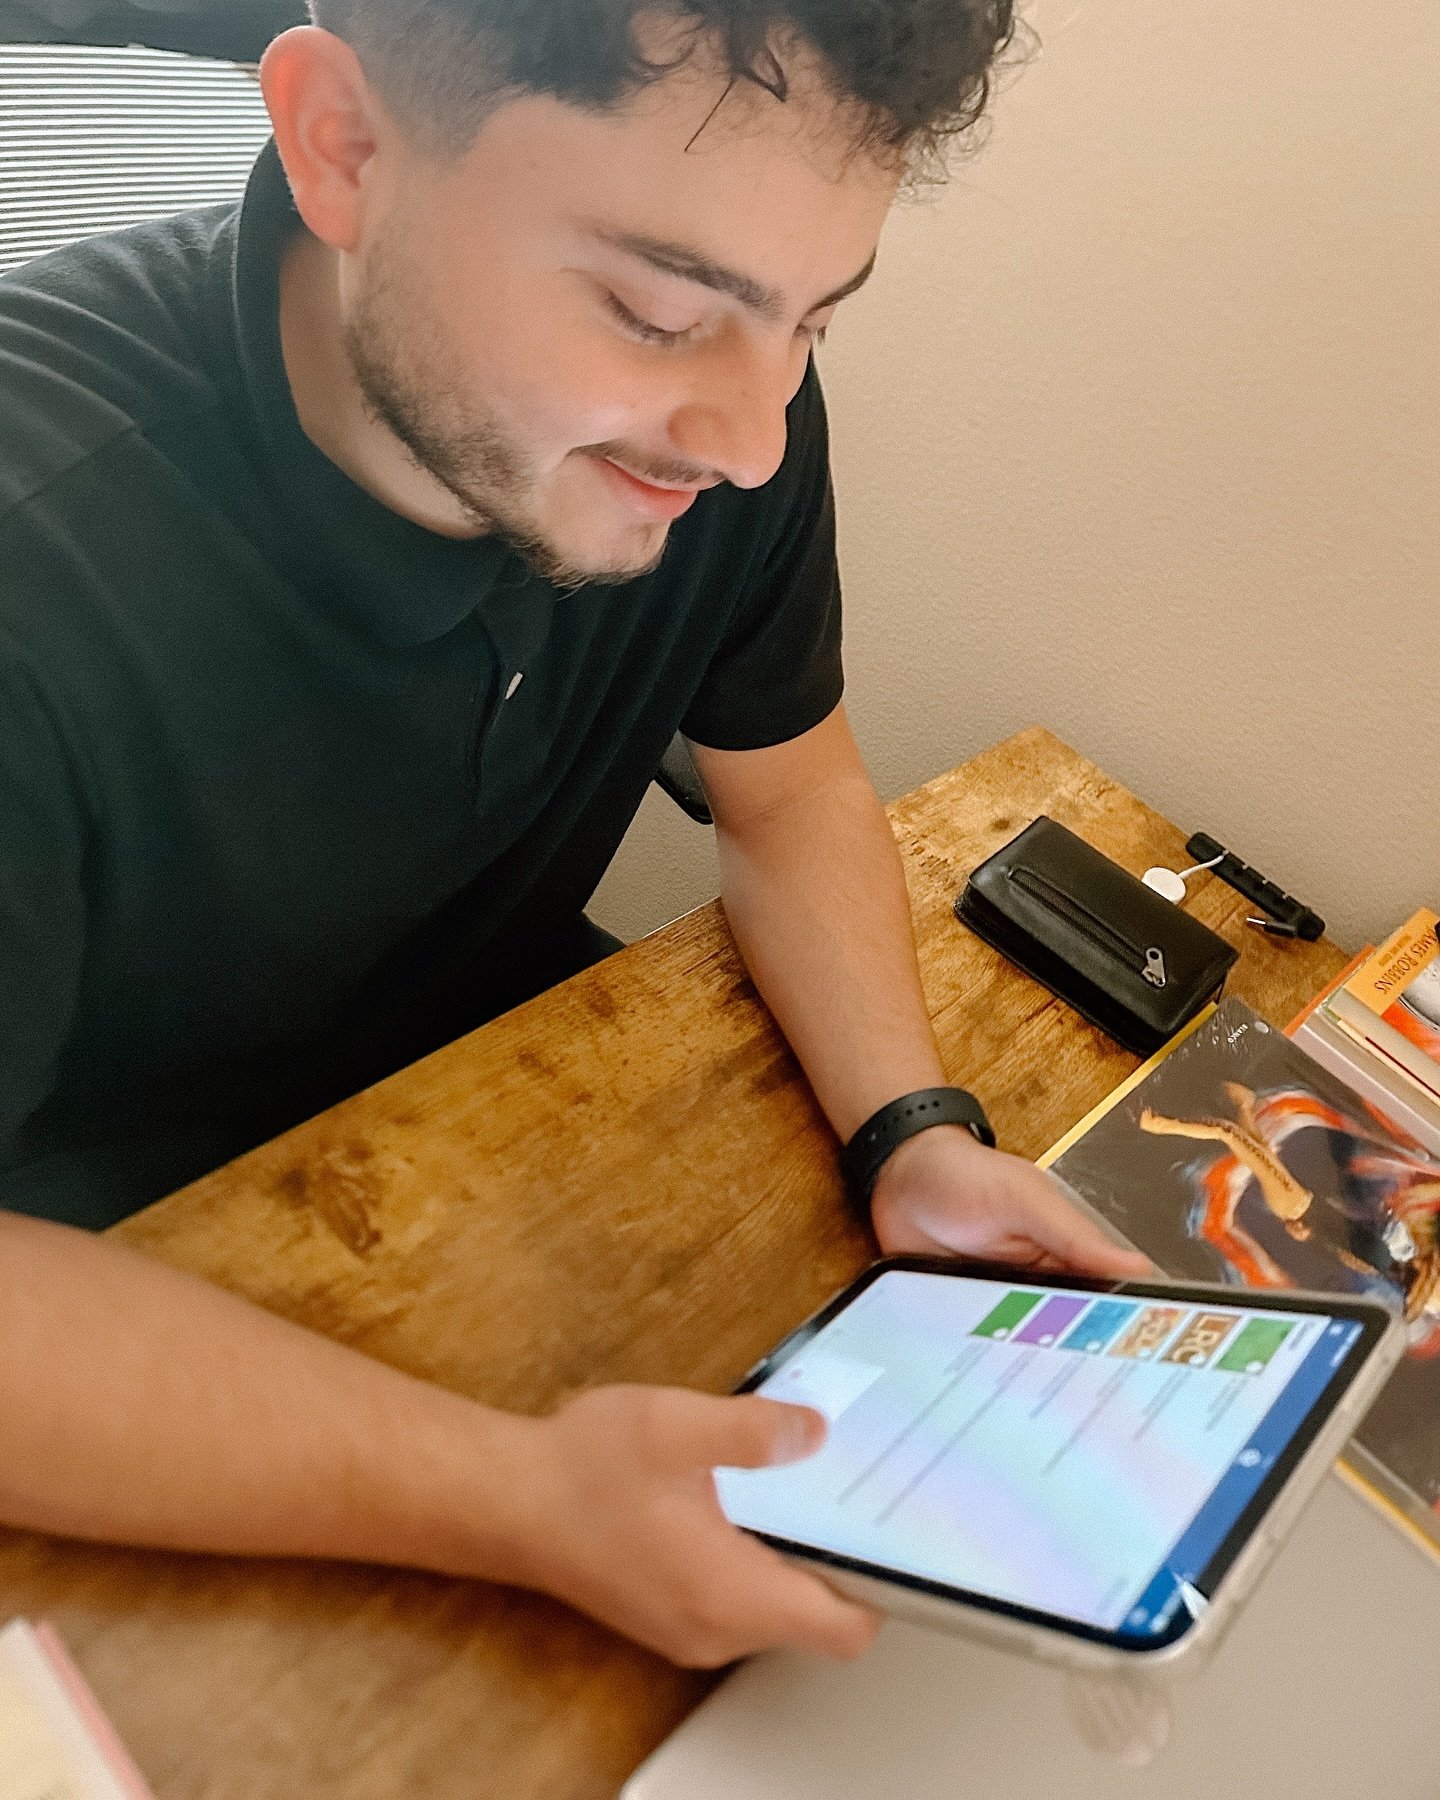 DREAM FULFILLED 📓
 &ldquo;I needed an iPad in order to make school life easier and finish my assignments. Dream Makers made that possible! I never imagined that.&rdquo;
 Bryan&rsquo;s dream of having an iPad of his own was recently fulfilled by a ge